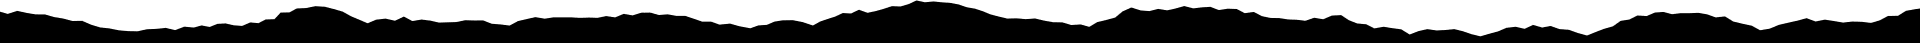 A black and green background with a white line.